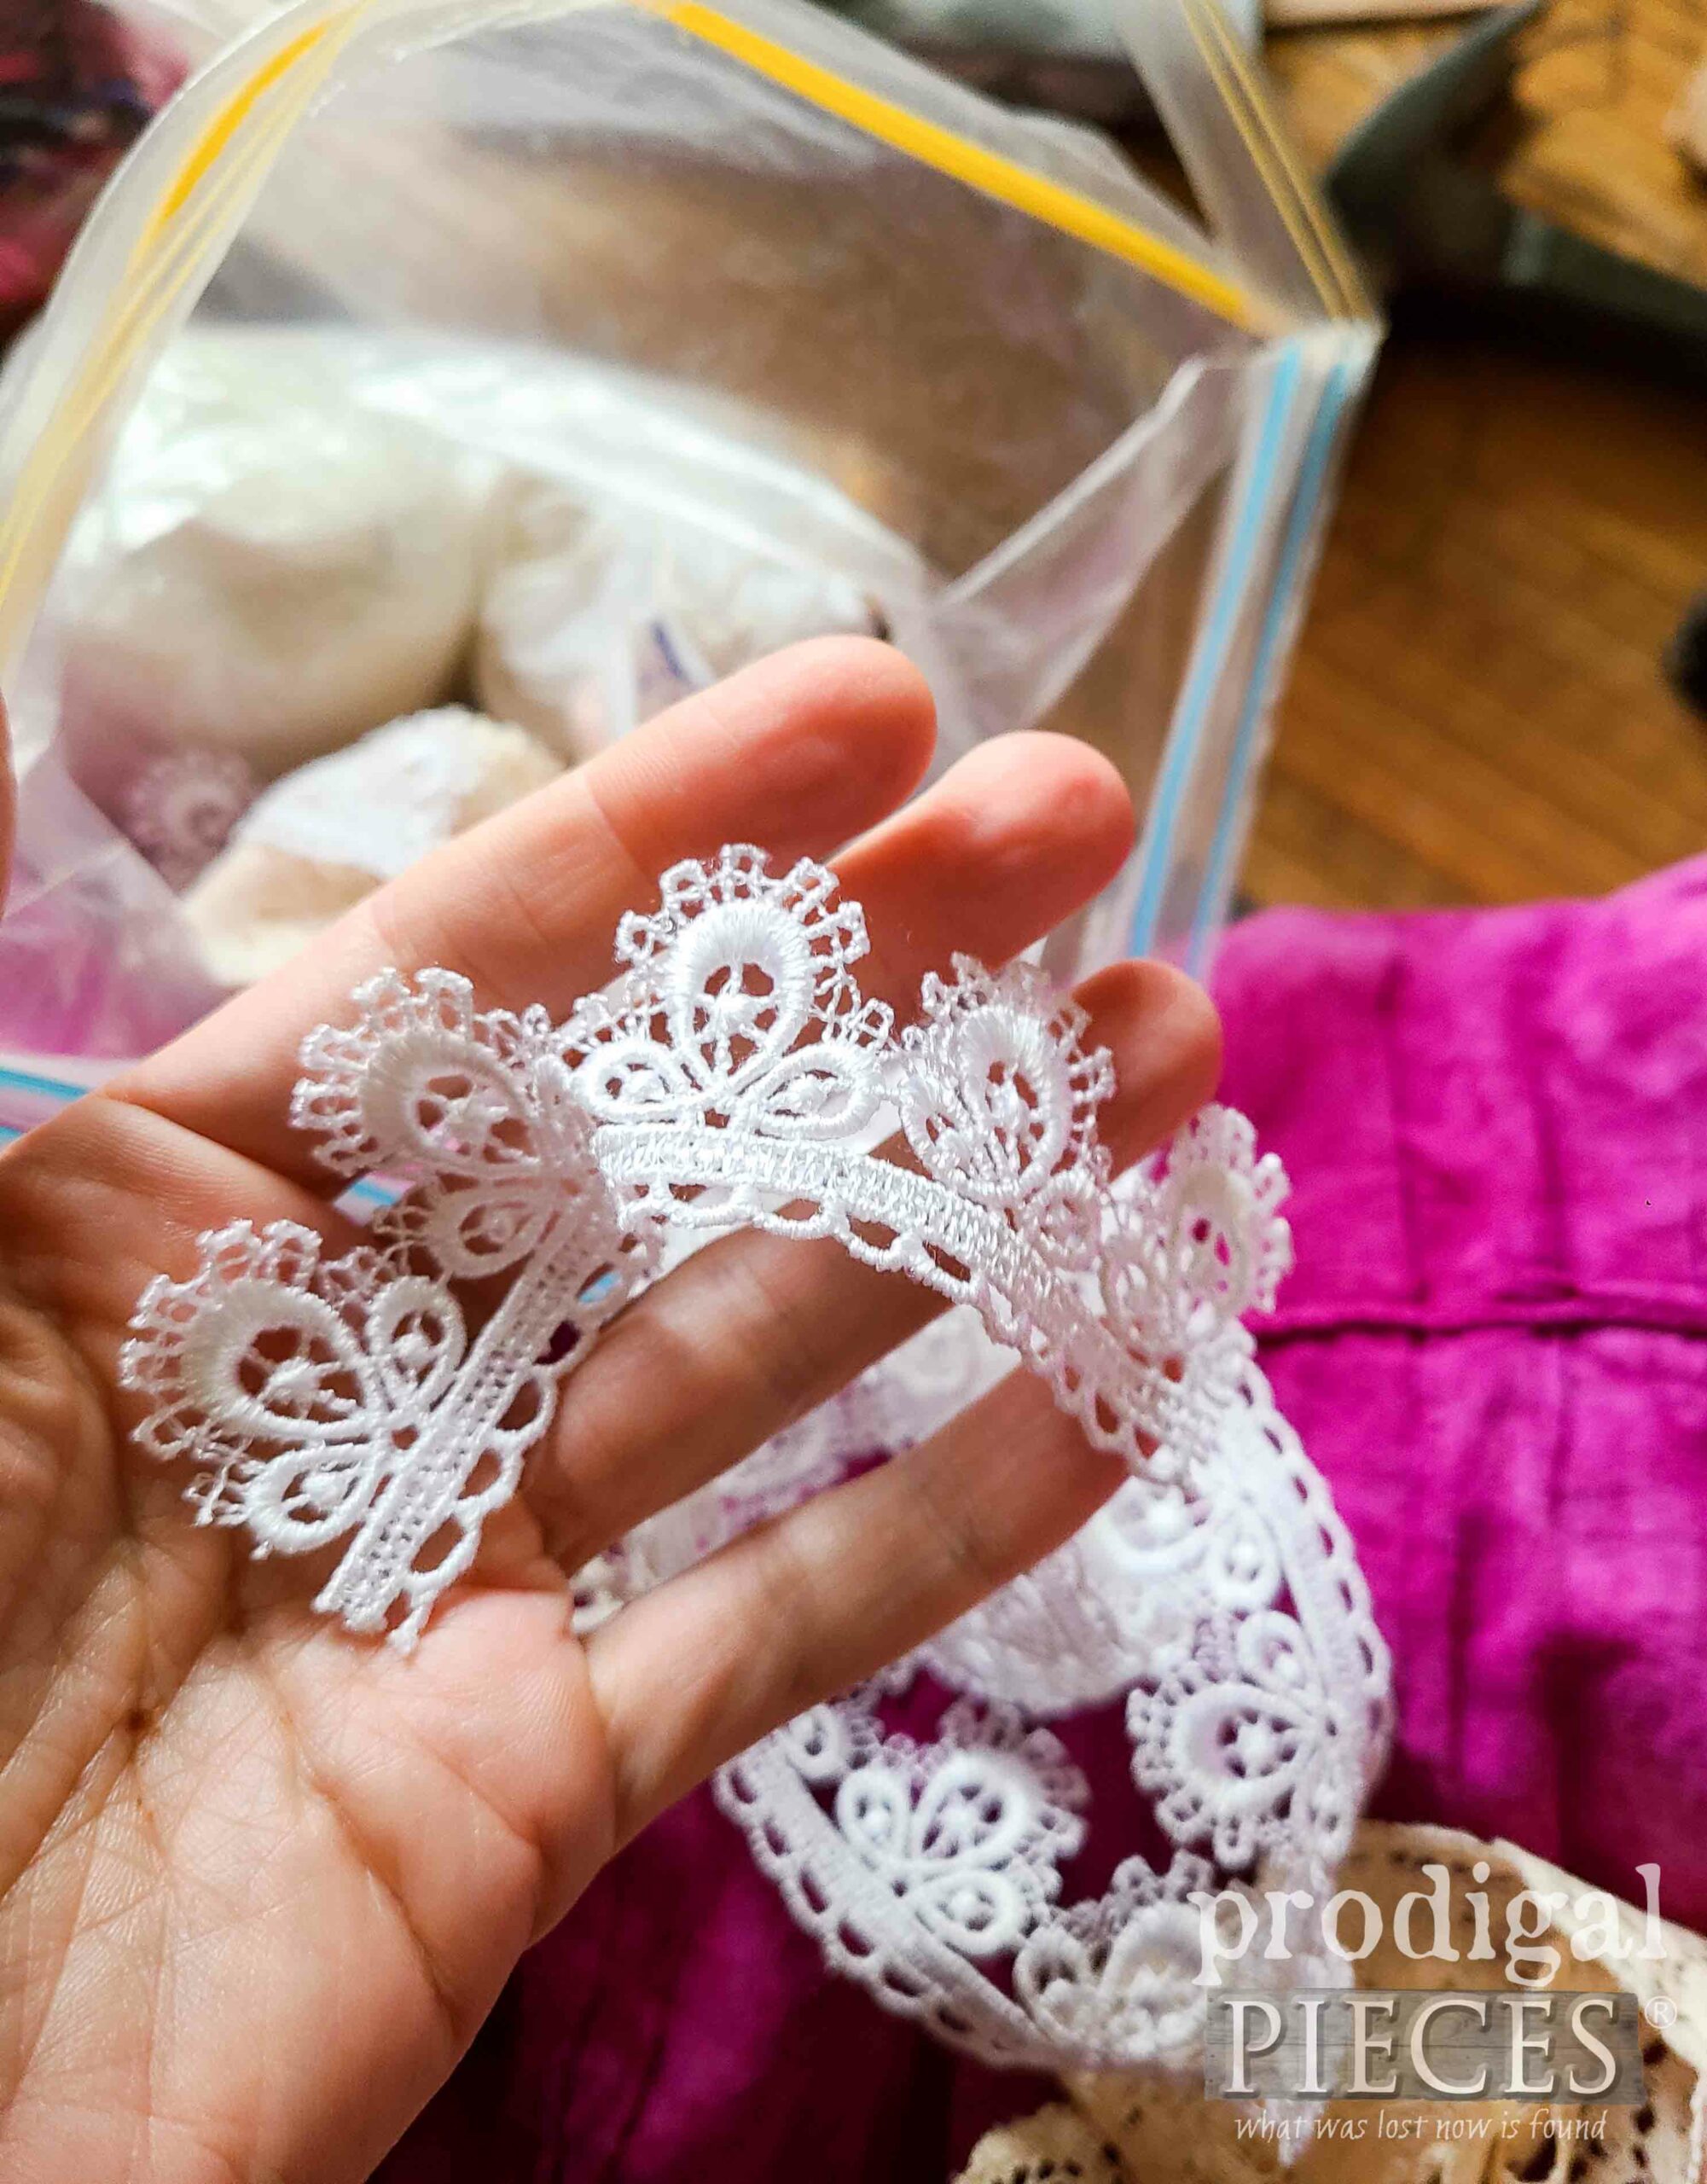 Vintage Lace Trimmings to Create Shabby Chic Goose | prodigalpieces.com #prodigalpieces